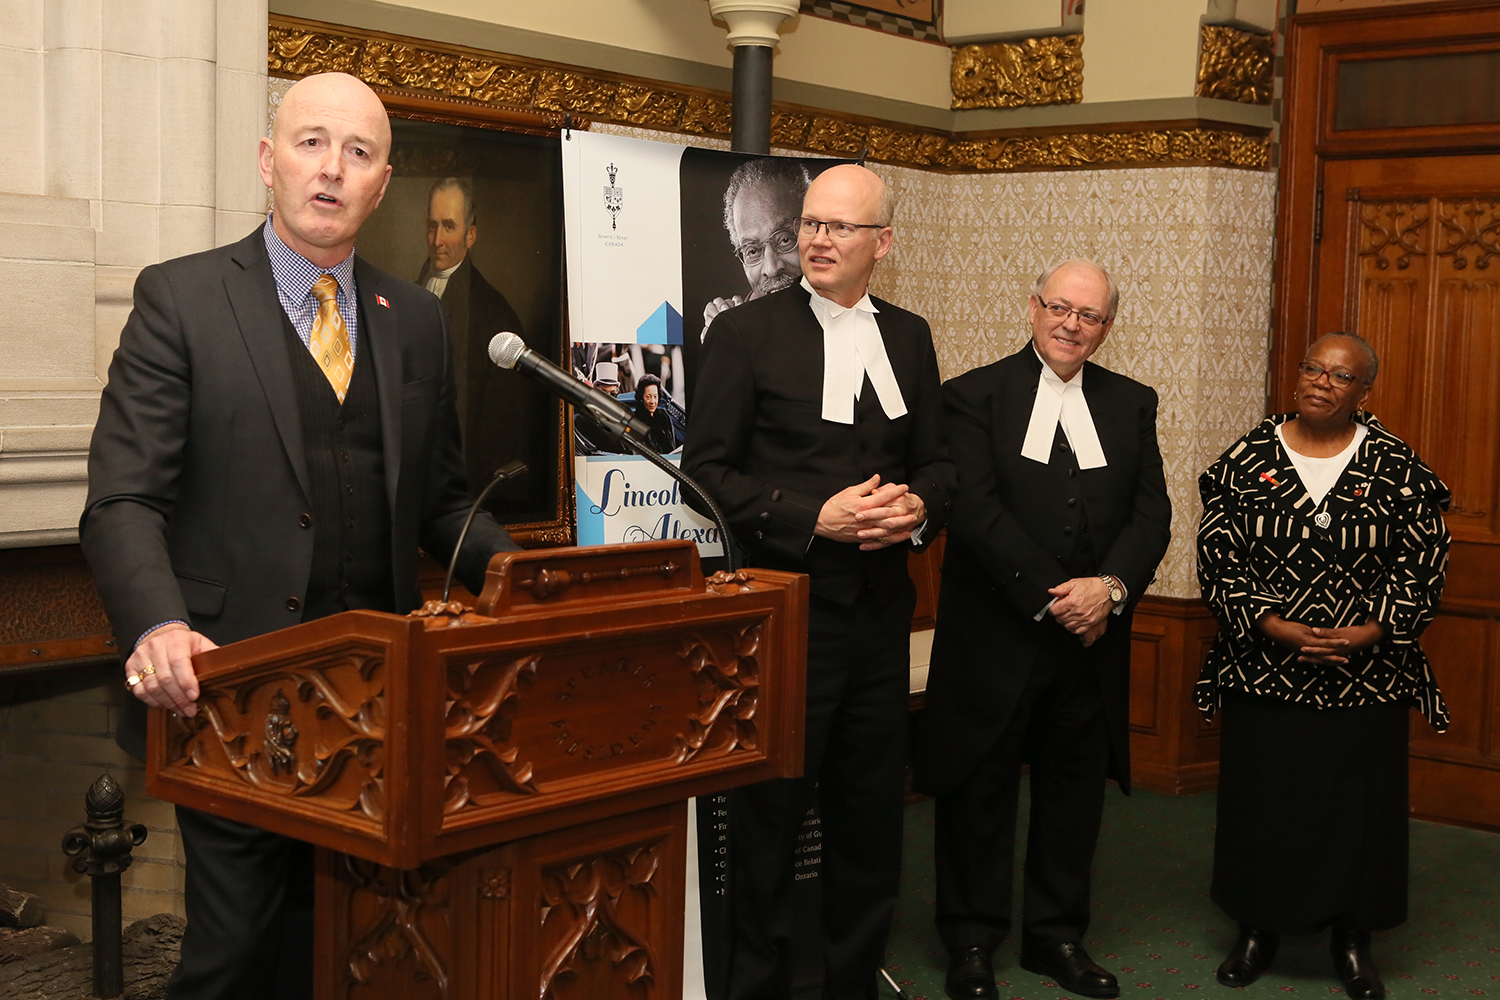 MP David Sweet, who represents much of Alexander’s former constituency, delivers remarks at the reception. In 2014, MP Sweet introduced Bill S-213 in the House of Commons: An Act Respecting Lincoln Alexander Day.